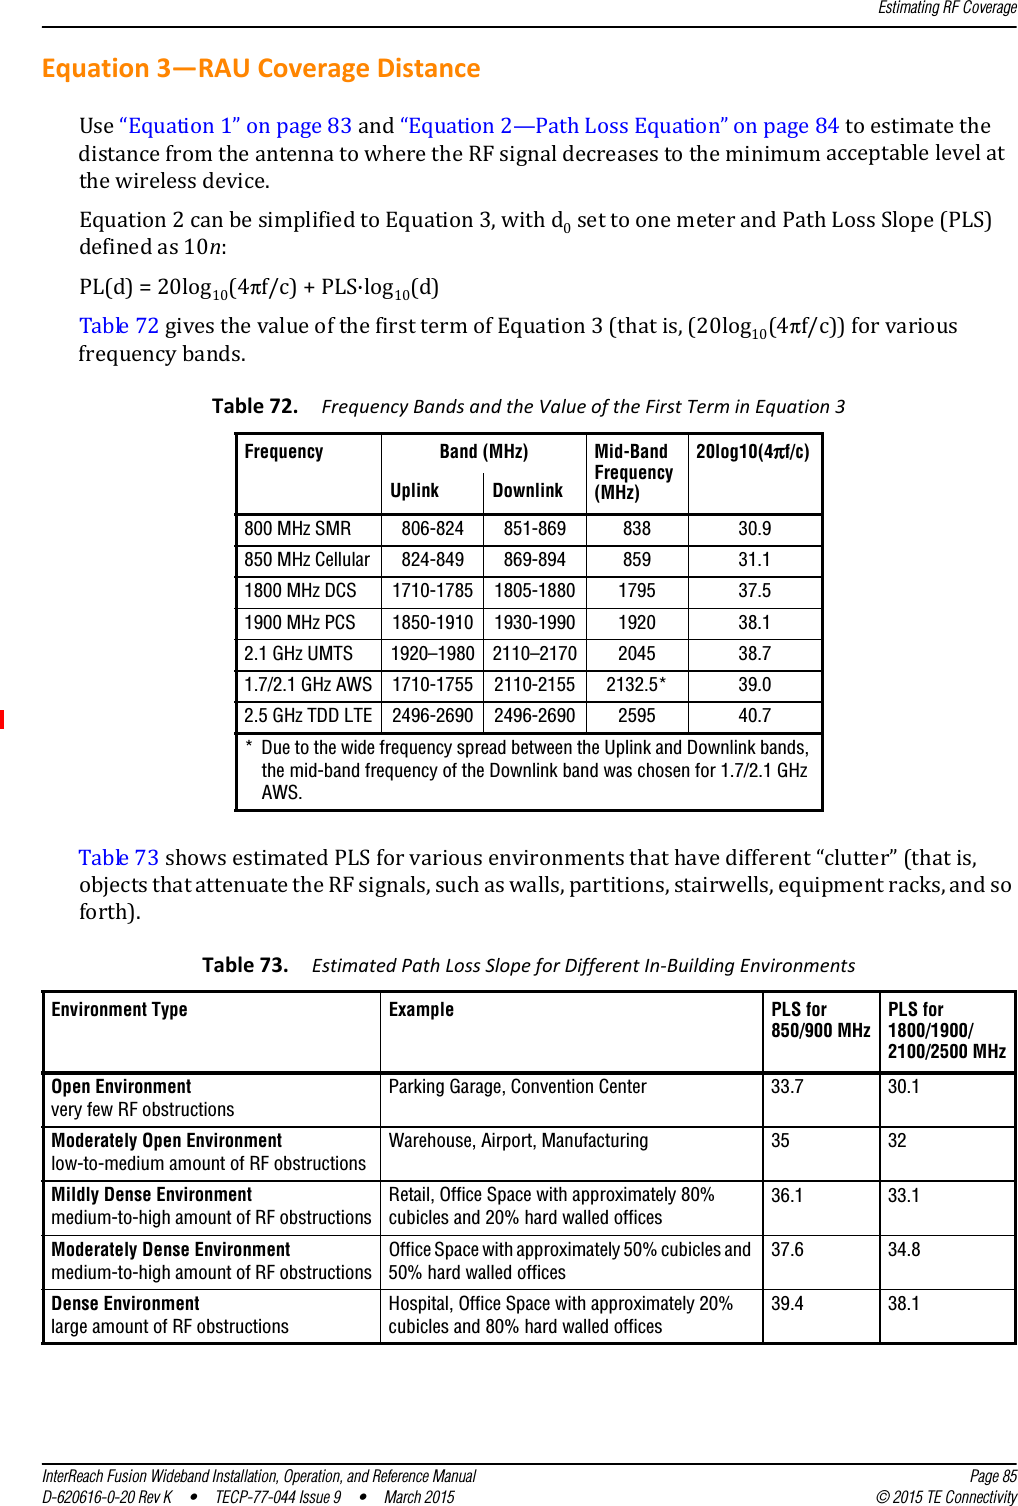 Estimating RF CoverageInterReach Fusion Wideband Installation, Operation, and Reference Manual Page 85D-620616-0-20 Rev K  •  TECP-77-044 Issue 9  •  March 2015 © 2015 TE ConnectivityEquation 3—RAU Coverage DistanceUse “Equation 1” on page 83 and “Equation 2—Path Loss Equation” on page 84 to estimate the distance from the antenna to where the RF signal decreases to the minimum acceptable level at the wireless device.Equation 2 can be simplified to Equation 3, with d0 set to one meter and Path Loss Slope (PLS) defined as 10n:PL(d) = 20log10(4πf/c) + PLS·log10(d)Table 72 gives the value of the first term of Equation 3 (that is, (20log10(4πf/c)) for various frequency bands.Table 73 shows estimated PLS for various environments that have different “clutter” (that is, objects that attenuate the RF signals, such as walls, partitions, stairwells, equipment racks, and so forth).Table 72. Frequency Bands and the Value of the First Term in Equation 3Frequency Band (MHz) Mid-Band Frequency  (MHz)20log10(4πf/c)Uplink Downlink800 MHz SMR 806-824 851-869 838 30.9850 MHz Cellular 824-849 869-894 859 31.11800 MHz DCS 1710-1785 1805-1880 1795 37.51900 MHz PCS 1850-1910 1930-1990 1920 38.12.1 GHz UMTS 1920–1980 2110–2170 2045 38.71.7/2.1 GHz AWS 1710-1755 2110-2155 2132.5* 39.02.5 GHz TDD LTE 2496-2690 2496-2690 2595 40.7* Due to the wide frequency spread between the Uplink and Downlink bands, the mid-band frequency of the Downlink band was chosen for 1.7/2.1 GHz AWS.Table 73. Estimated Path Loss Slope for Different In-Building EnvironmentsEnvironment Type Example PLS for  850/900 MHzPLS for  1800/1900/ 2100/2500 MHzOpen Environment very few RF obstructionsParking Garage, Convention Center 33.7 30.1Moderately Open Environment low-to-medium amount of RF obstructionsWarehouse, Airport, Manufacturing 35 32Mildly Dense Environment medium-to-high amount of RF obstructionsRetail, Office Space with approximately 80% cubicles and 20% hard walled offices36.1 33.1Moderately Dense Environment medium-to-high amount of RF obstructionsOffice Space with approximately 50% cubicles and 50% hard walled offices37.6 34.8Dense Environment large amount of RF obstructionsHospital, Office Space with approximately 20% cubicles and 80% hard walled offices39.4 38.1